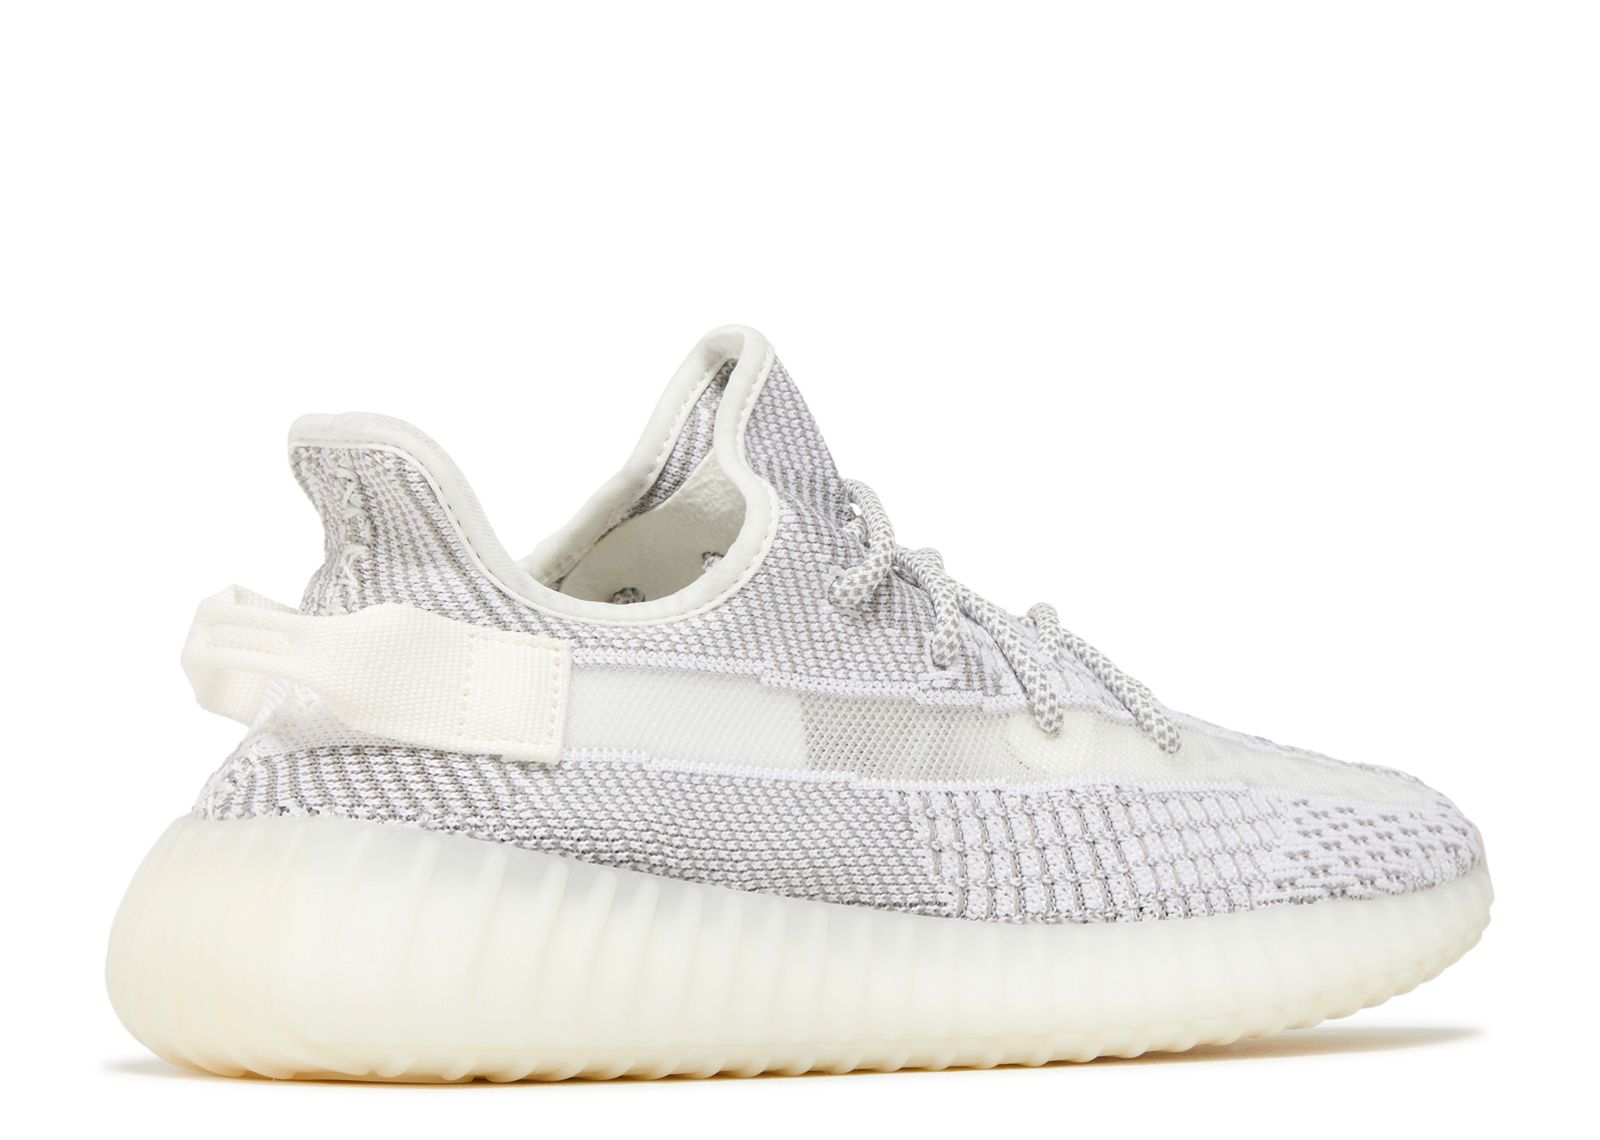 adidas Confirms Yeezy Boost 350 V2 Static Reflective Release